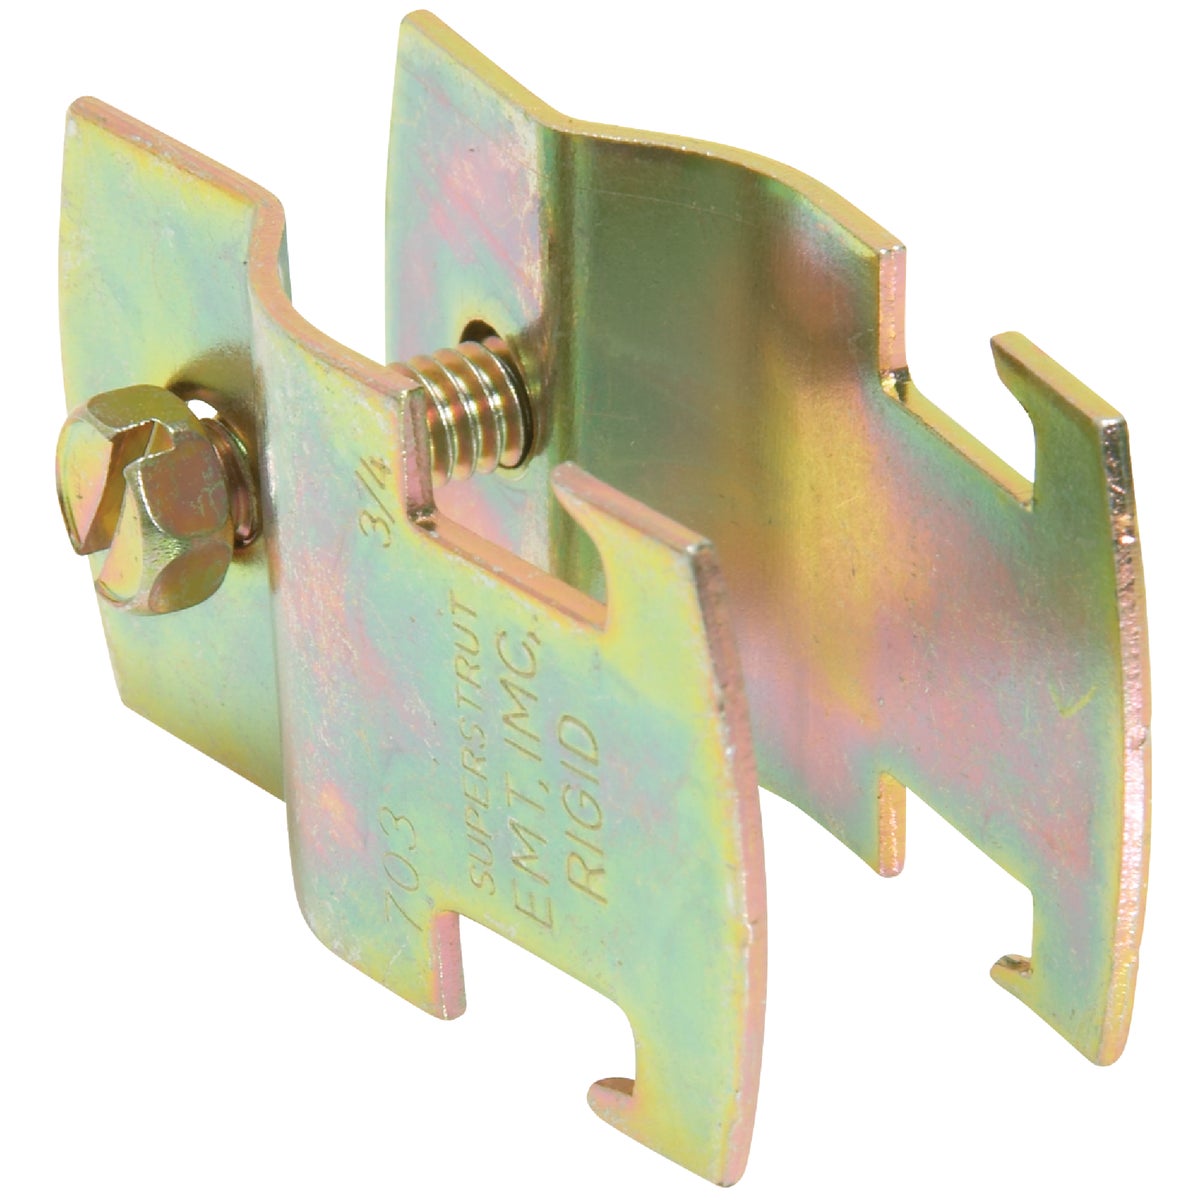 Superstrut 3/4 In. Gold Galvanized Electroplated Zinc Universal Pipe Clamp